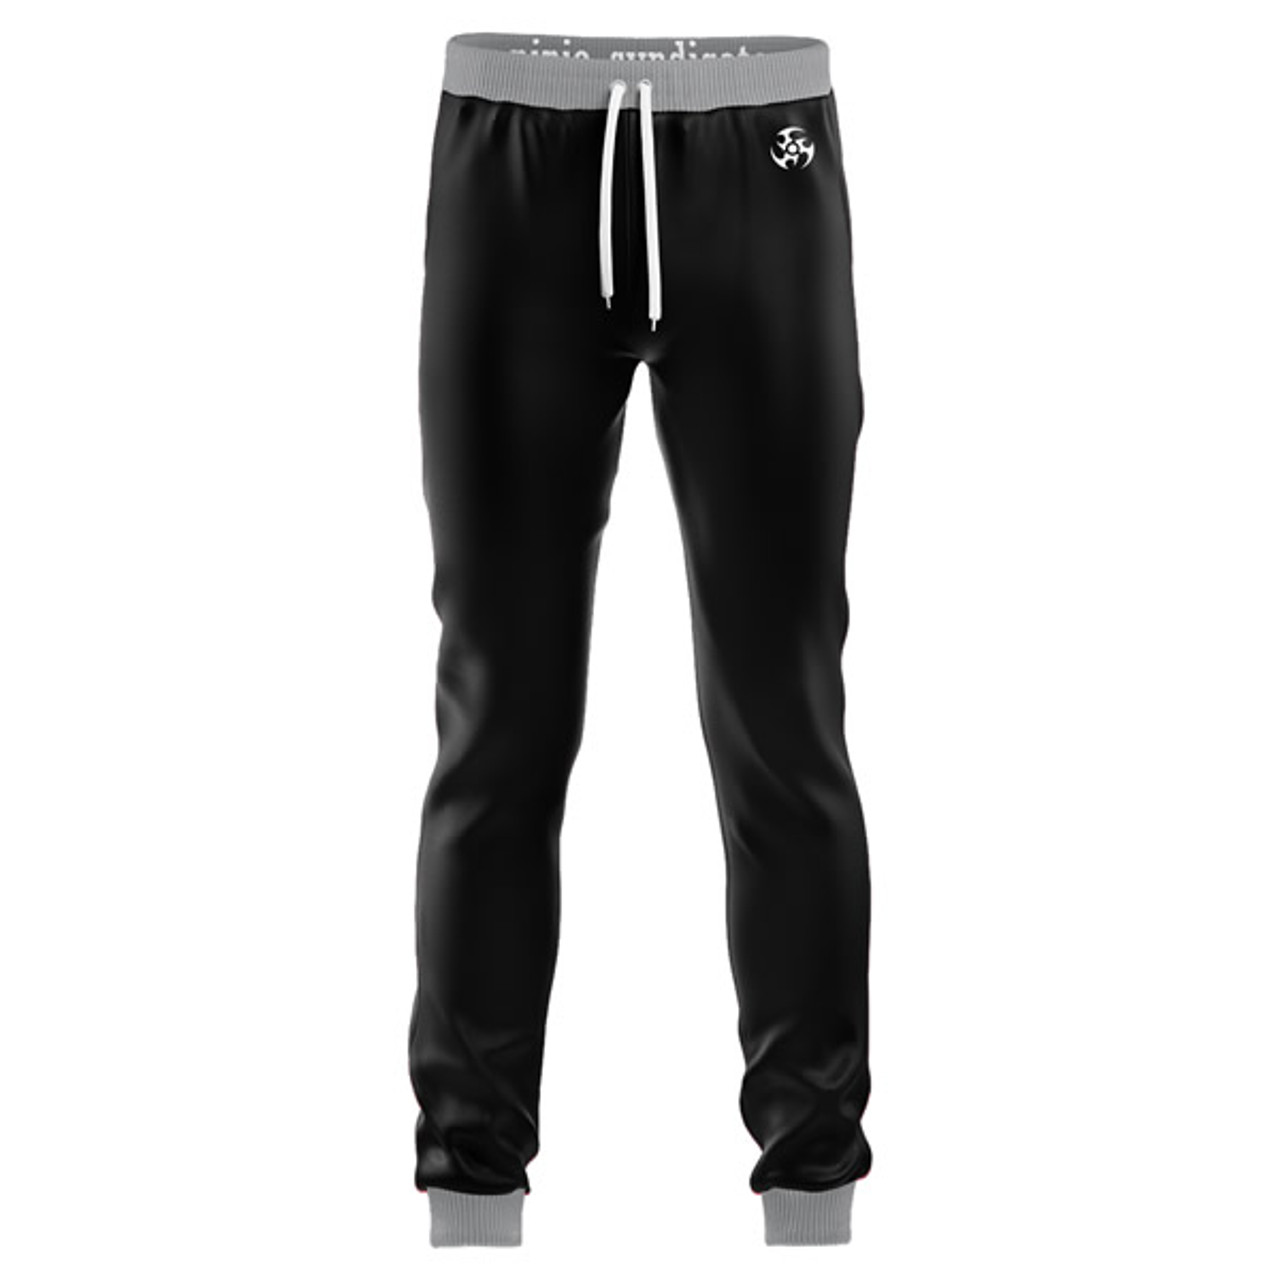 Gymreapers Performance Joggers - Obsidian